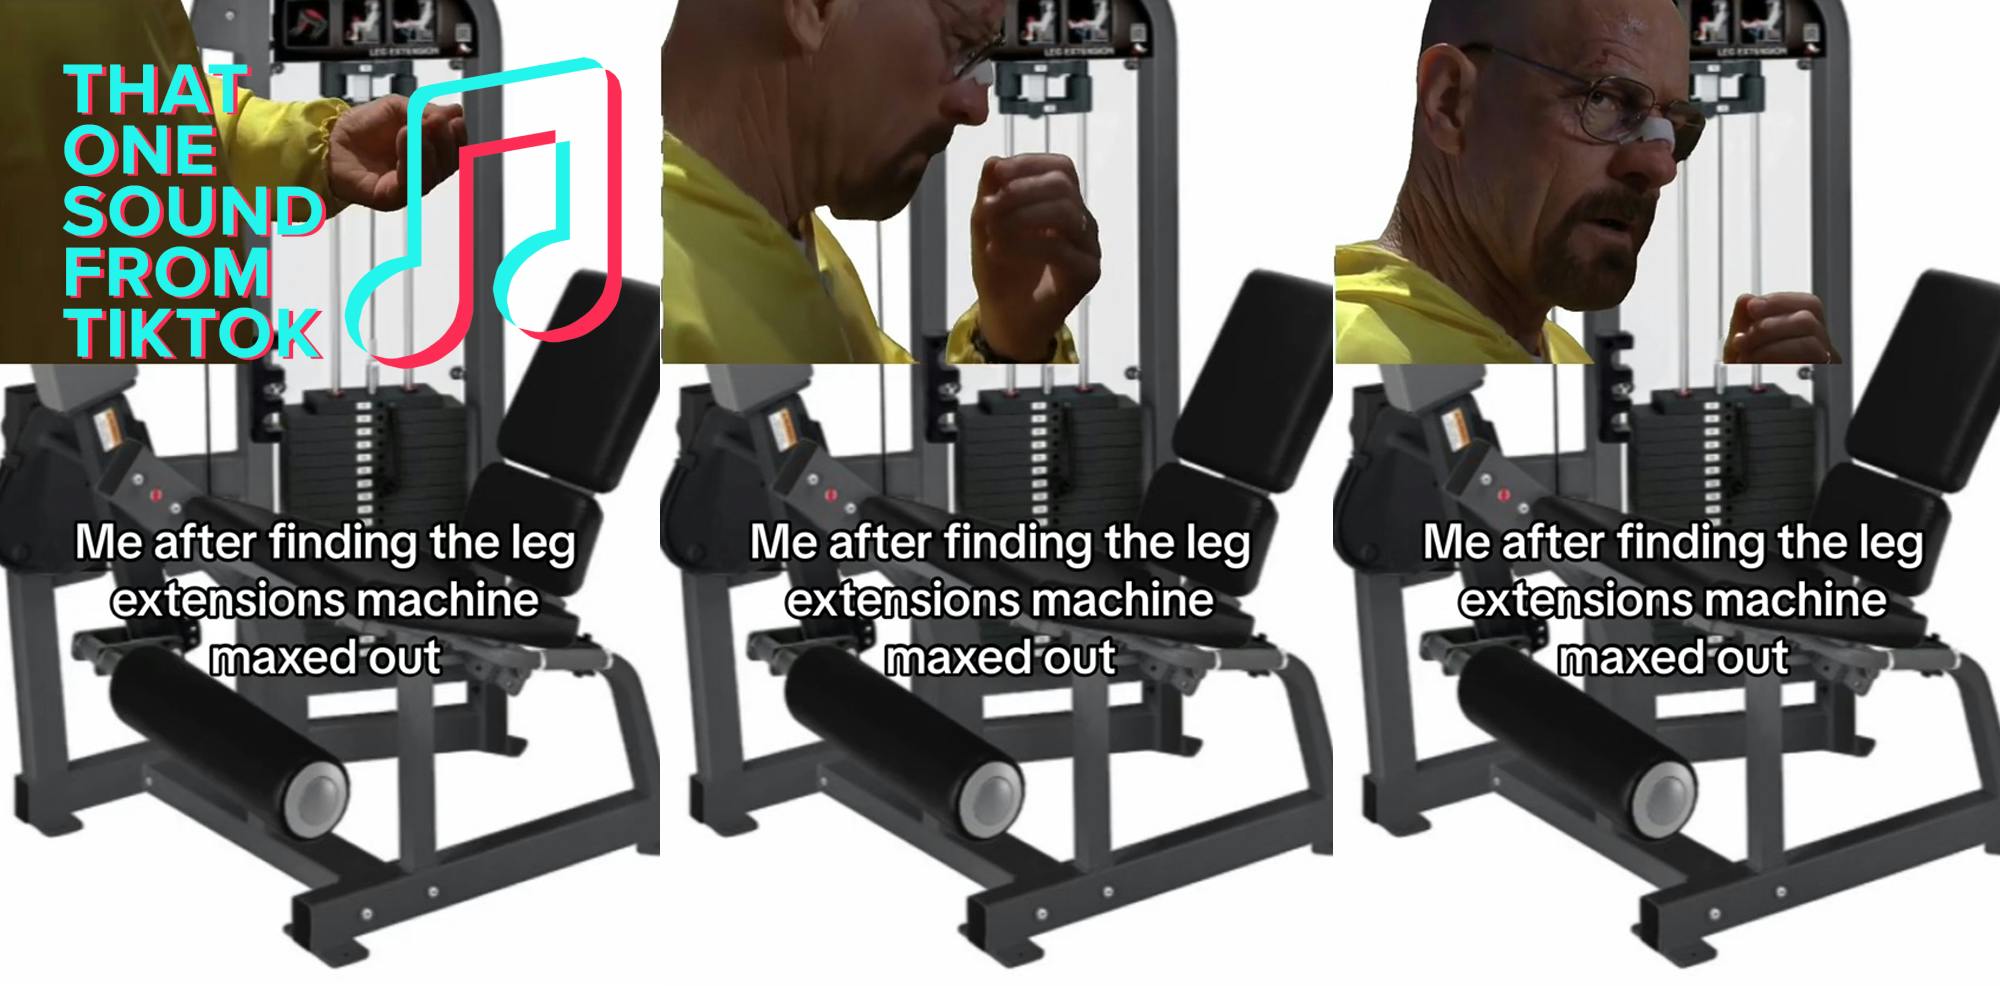 Walter White Breaking Bad meme over image of exercise machine with caption "Me after finding the leg extensions machine maxed out" with THAT ONE SOUND ON TIKTOK logo at top (l) Walter White Breaking Bad meme over image of exercise machine with caption "Me after finding the leg extensions machine maxed out" (c) Walter White Breaking Bad meme over image of exercise machine with caption "Me after finding the leg extensions machine maxed out" (r)